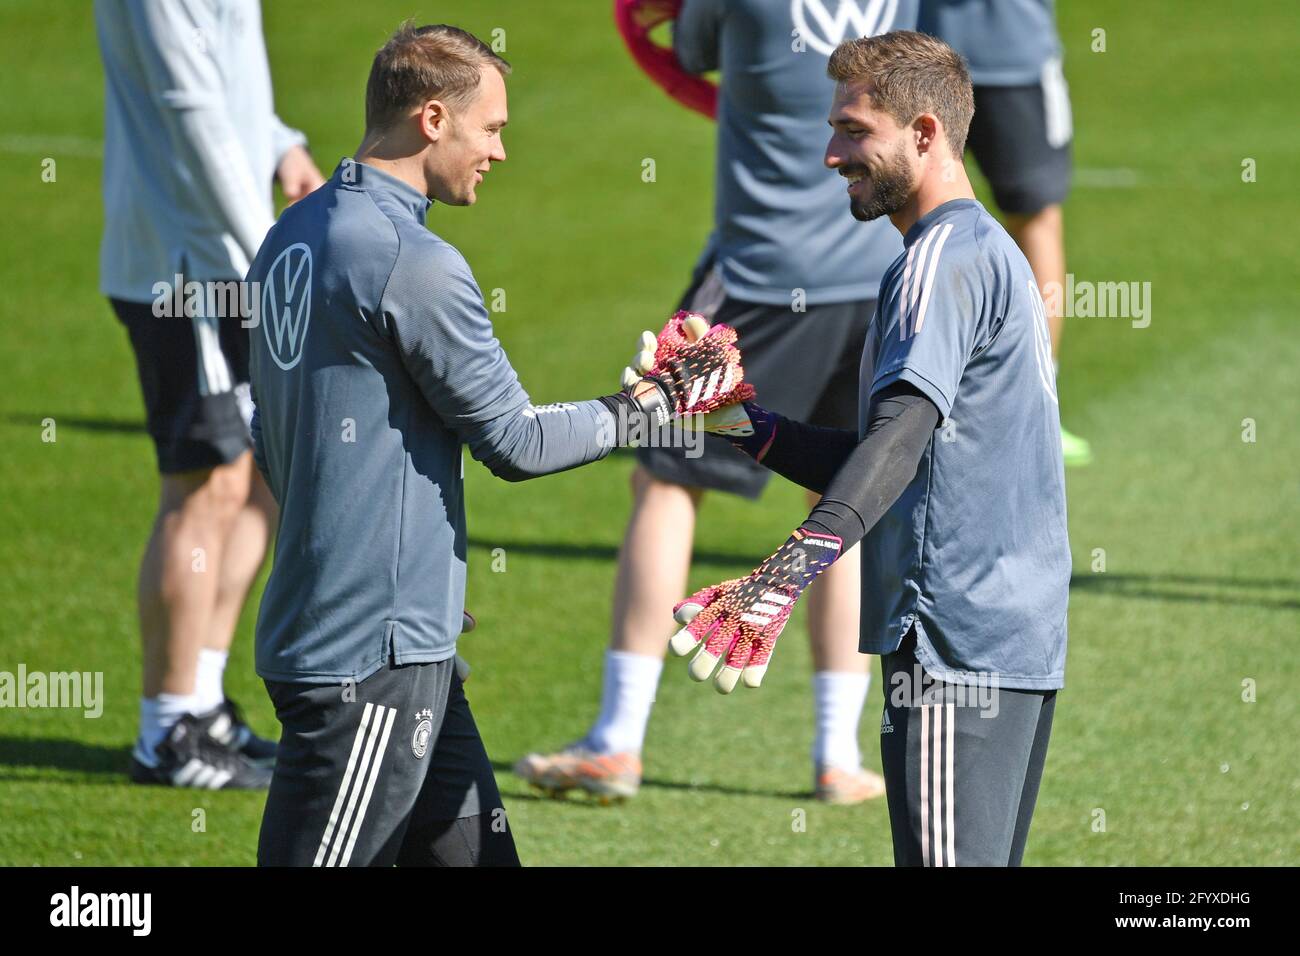 From left: Manuel NEUER (goalwart FC Bayern Munich) with Kevin TRAPP. Shake  hands. Training. German national soccer team, training camp in  Seefeld/Tyrol on May 30th, 2021 Stock Photo - Alamy